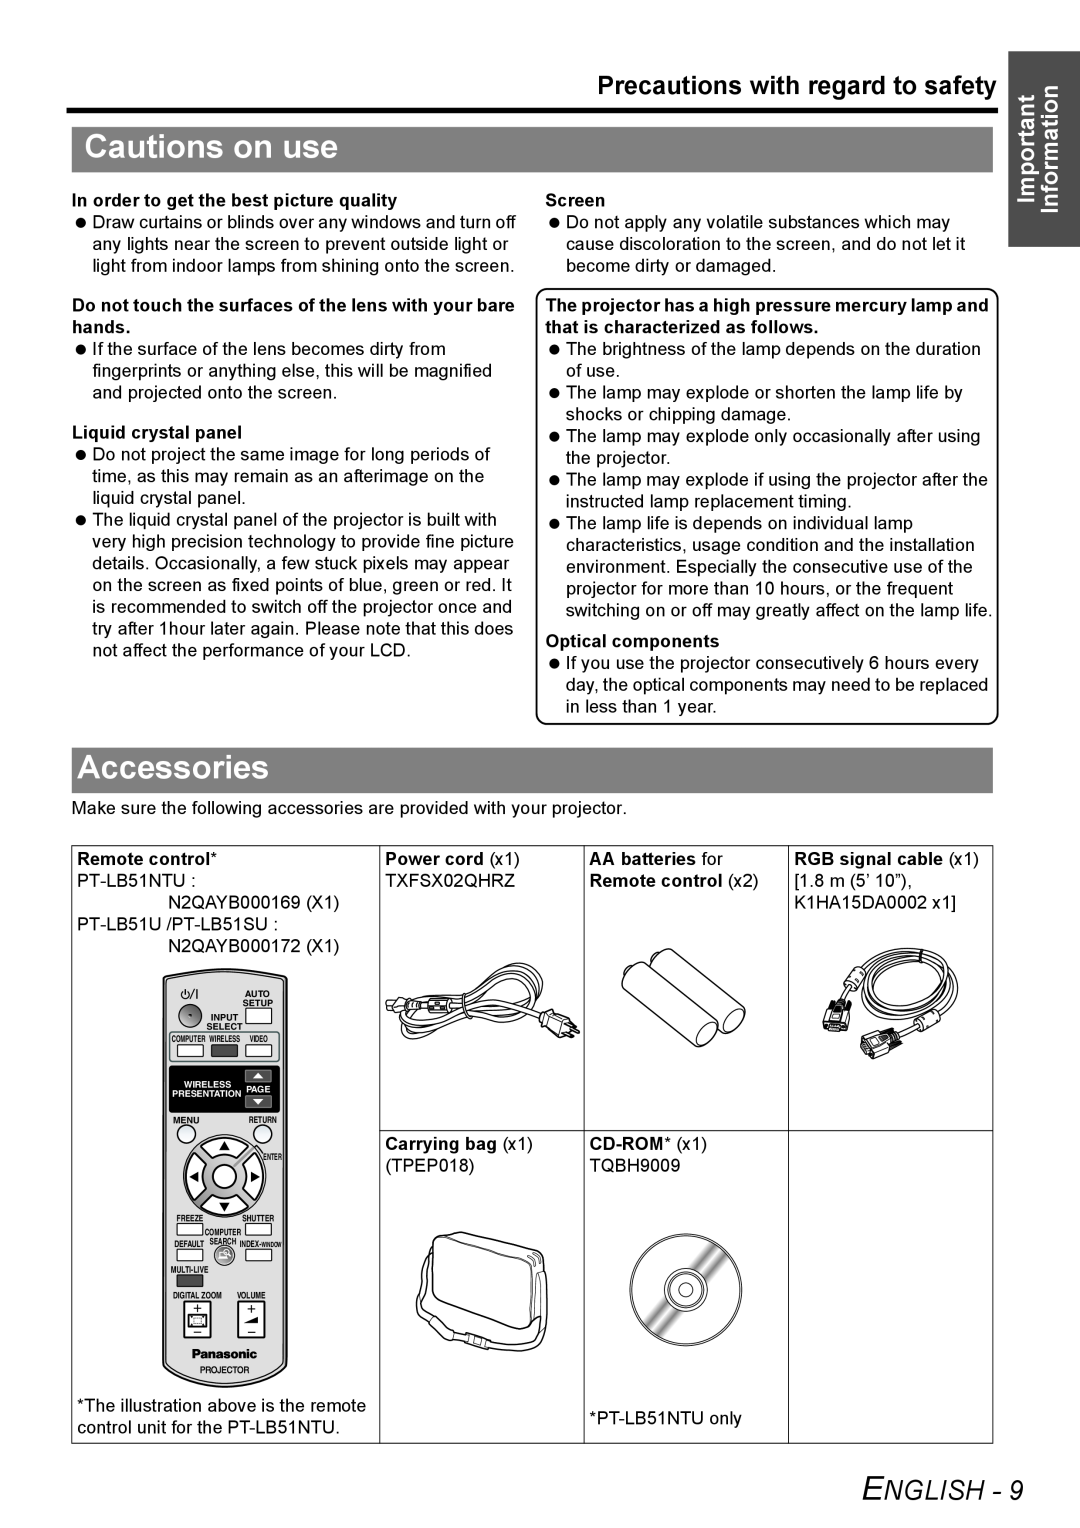 Panasonic PT-LB51NTU Cautions on use, Accessories, English, Precautions with regard to safety, Important Information 